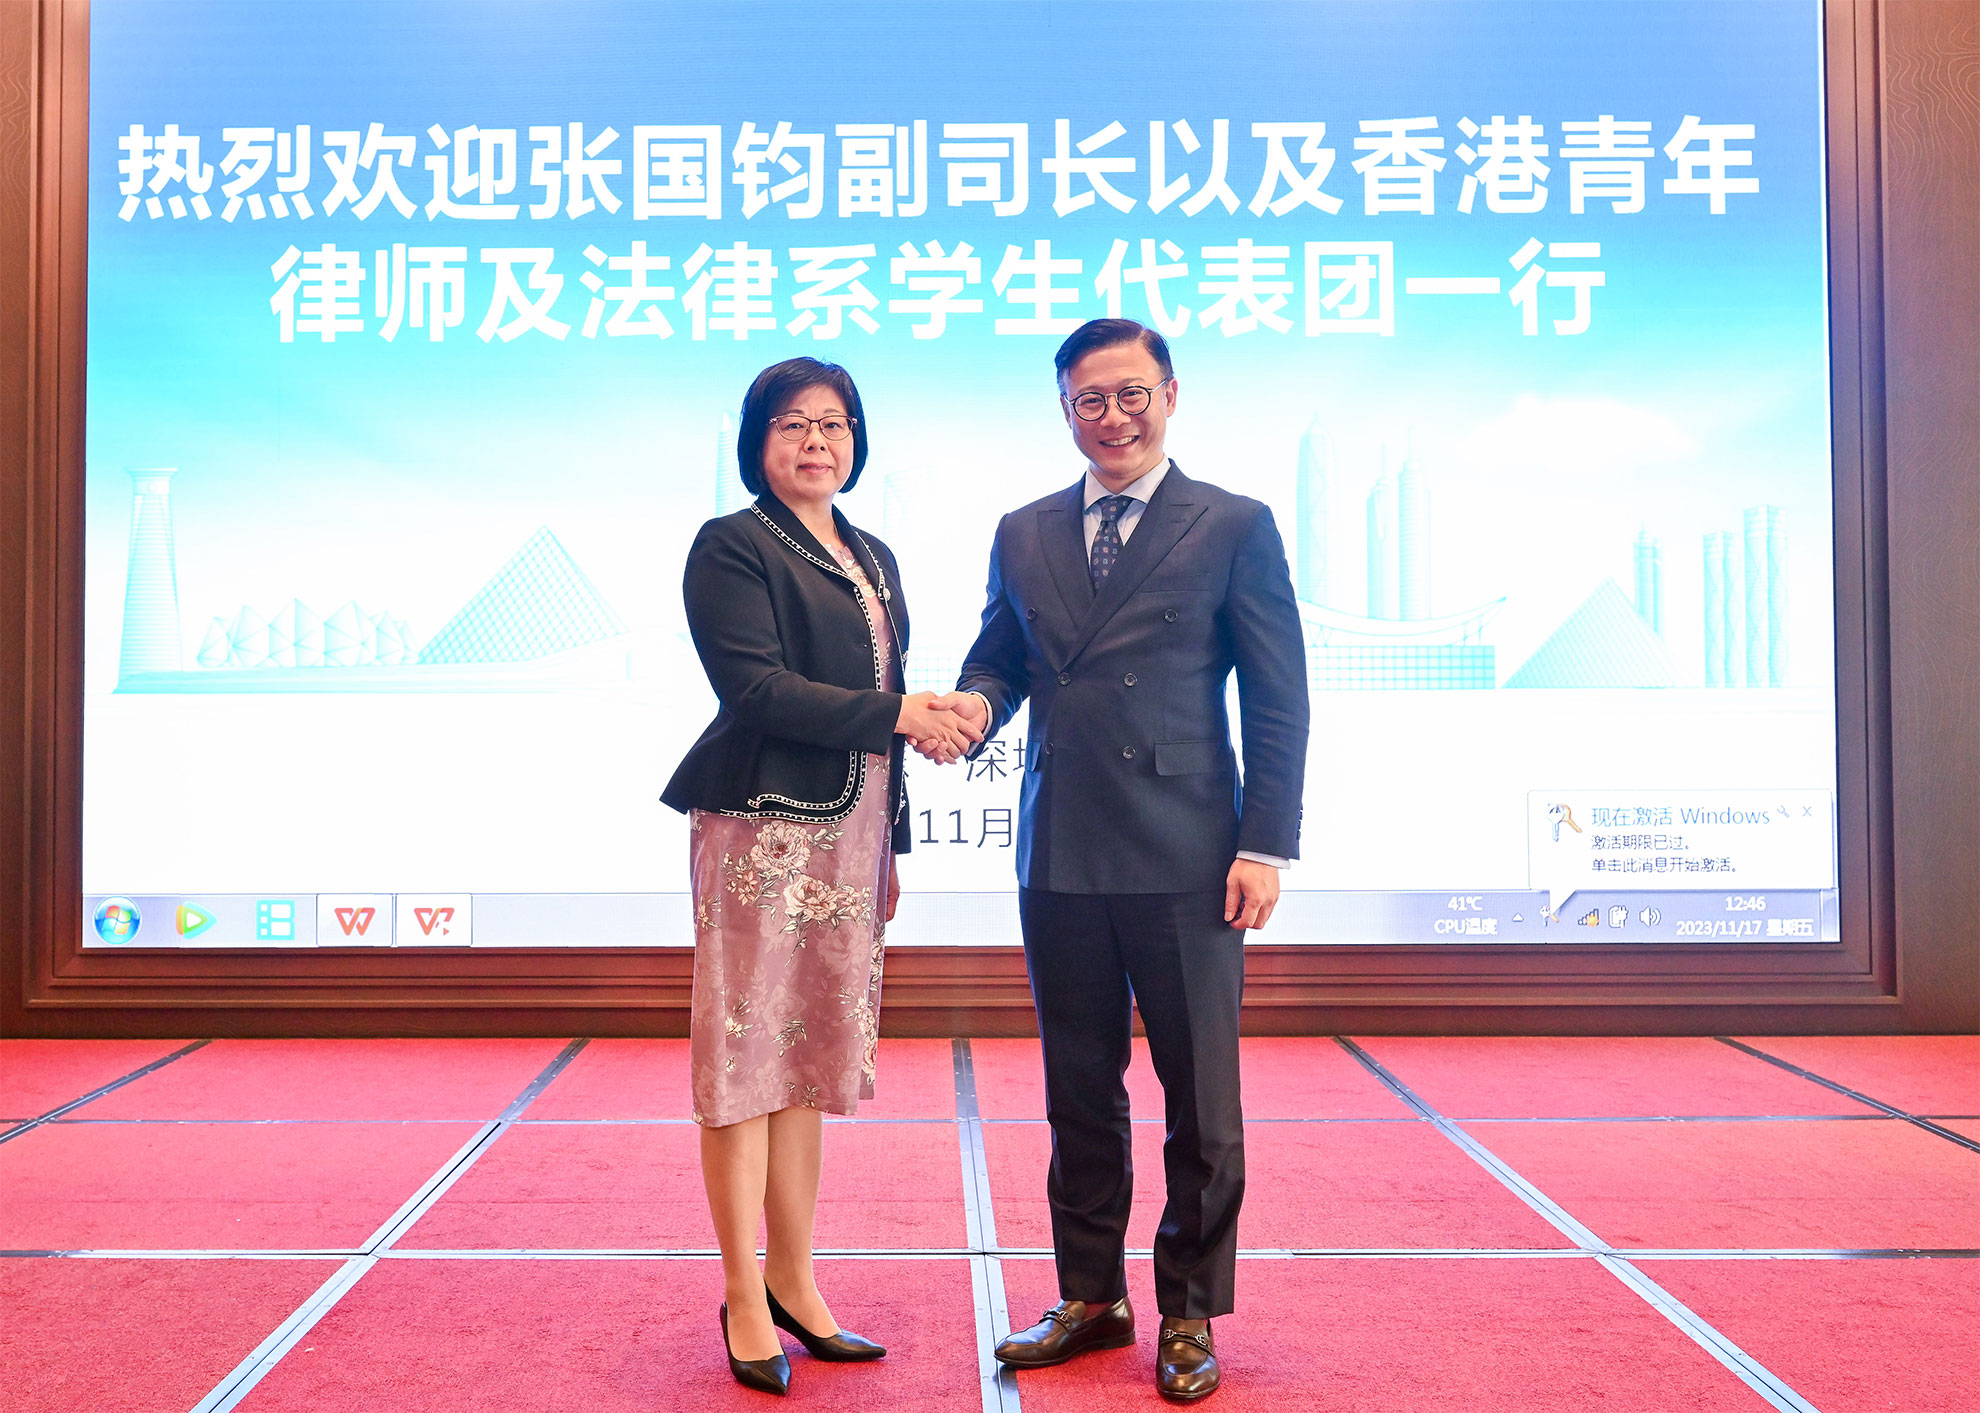 The Deputy Secretary for Justice, Mr Cheung Kwok-kwan, and a delegation of young lawyers led by him today (November 17) finished the first stop, Shenzhen, of their visit to Mainland cities of the Greater Bay Area. Photo shows Mr Cheung (right) meeting with the Director of the Justice Bureau of Shenzhen Municipality, Ms Jiang Xiaowen (left).